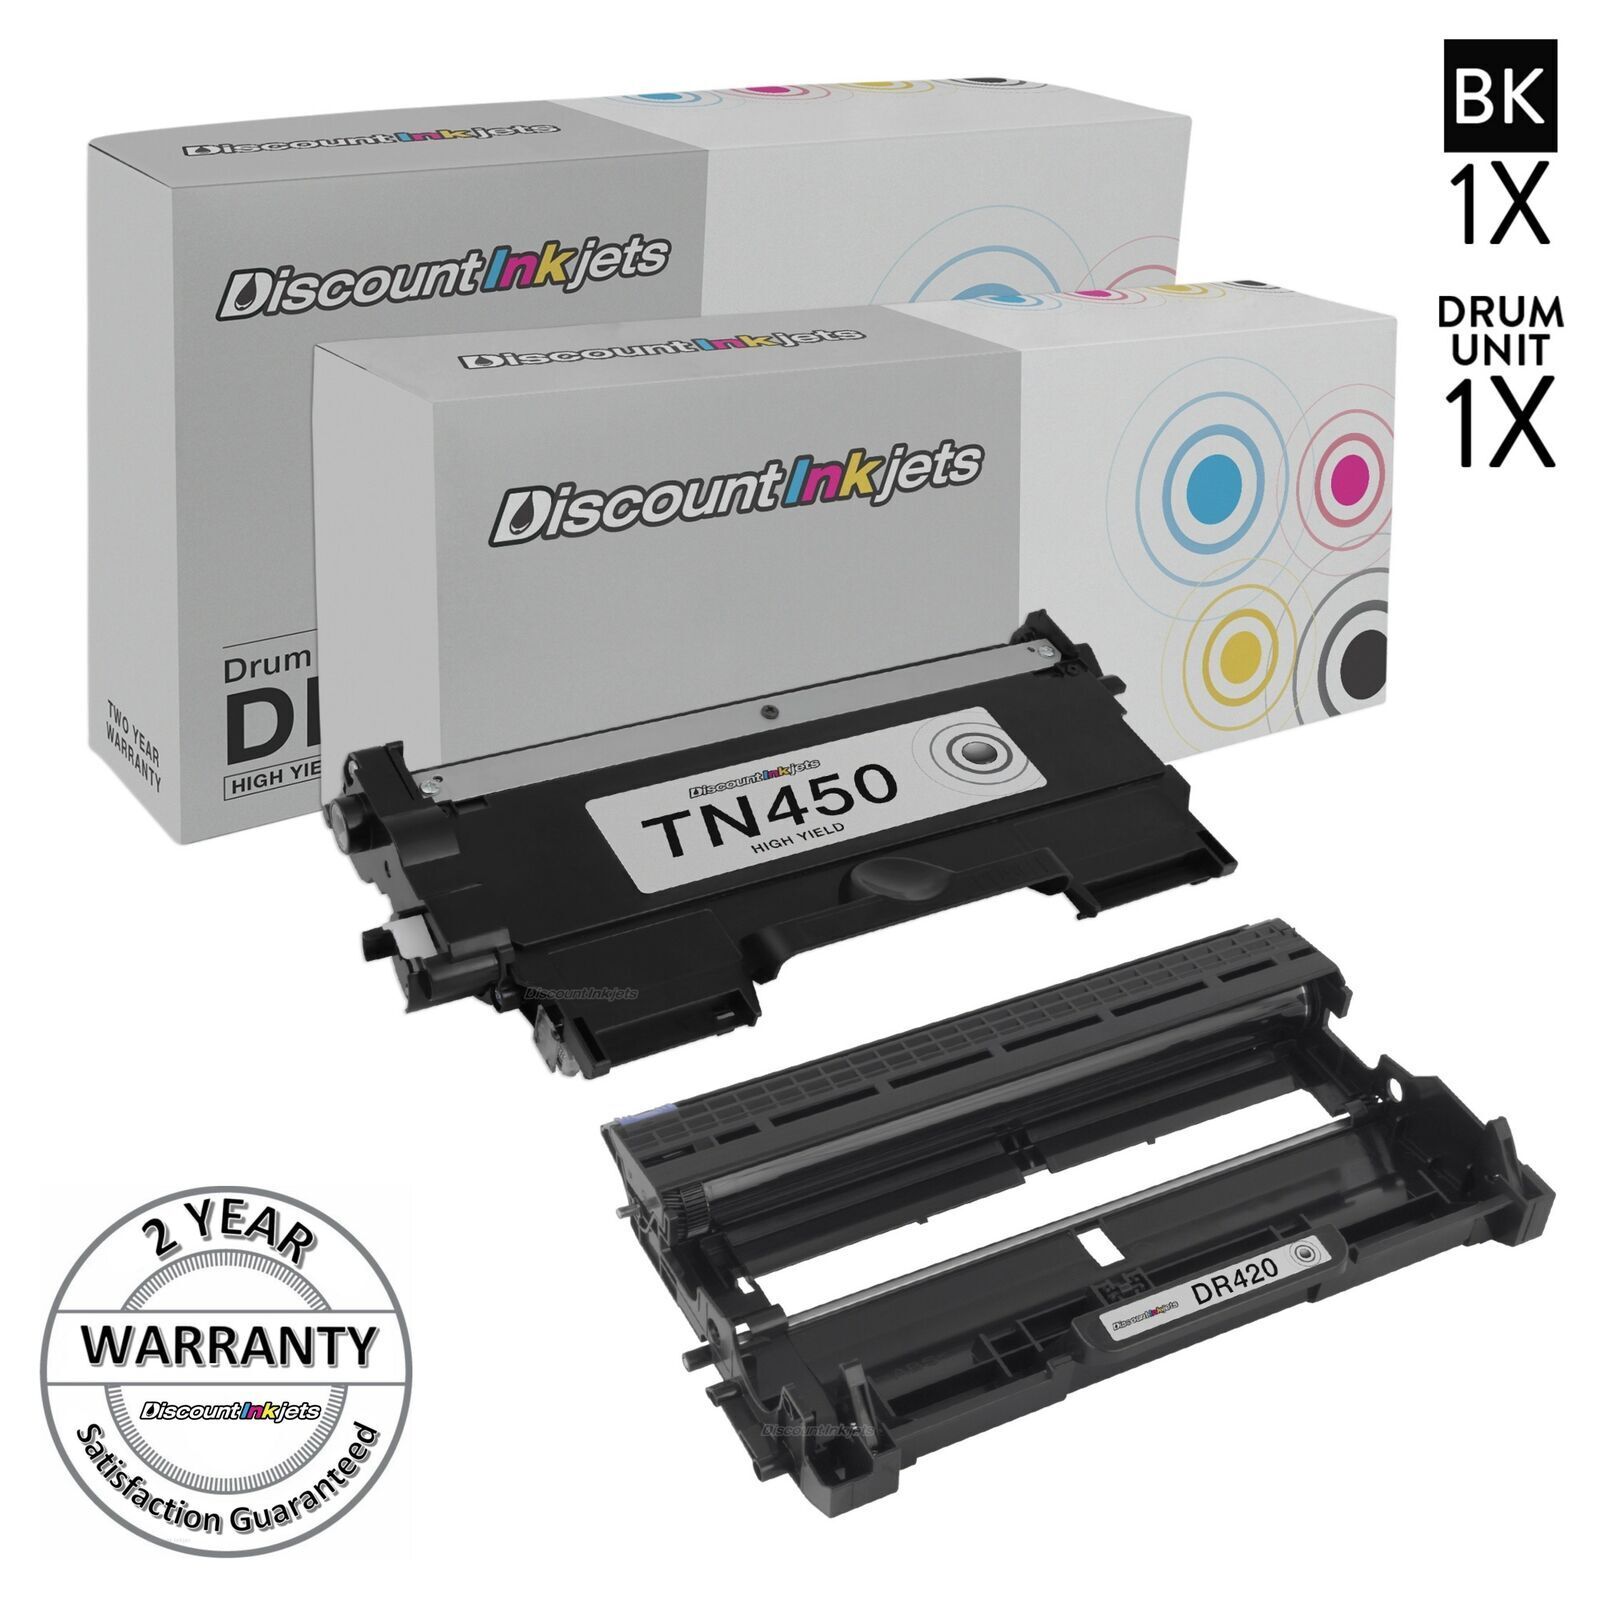 2PK TN450 Toner DR420 Drum for Brother DCP-7060D DCP-7065DN Intellifax 2840 2940